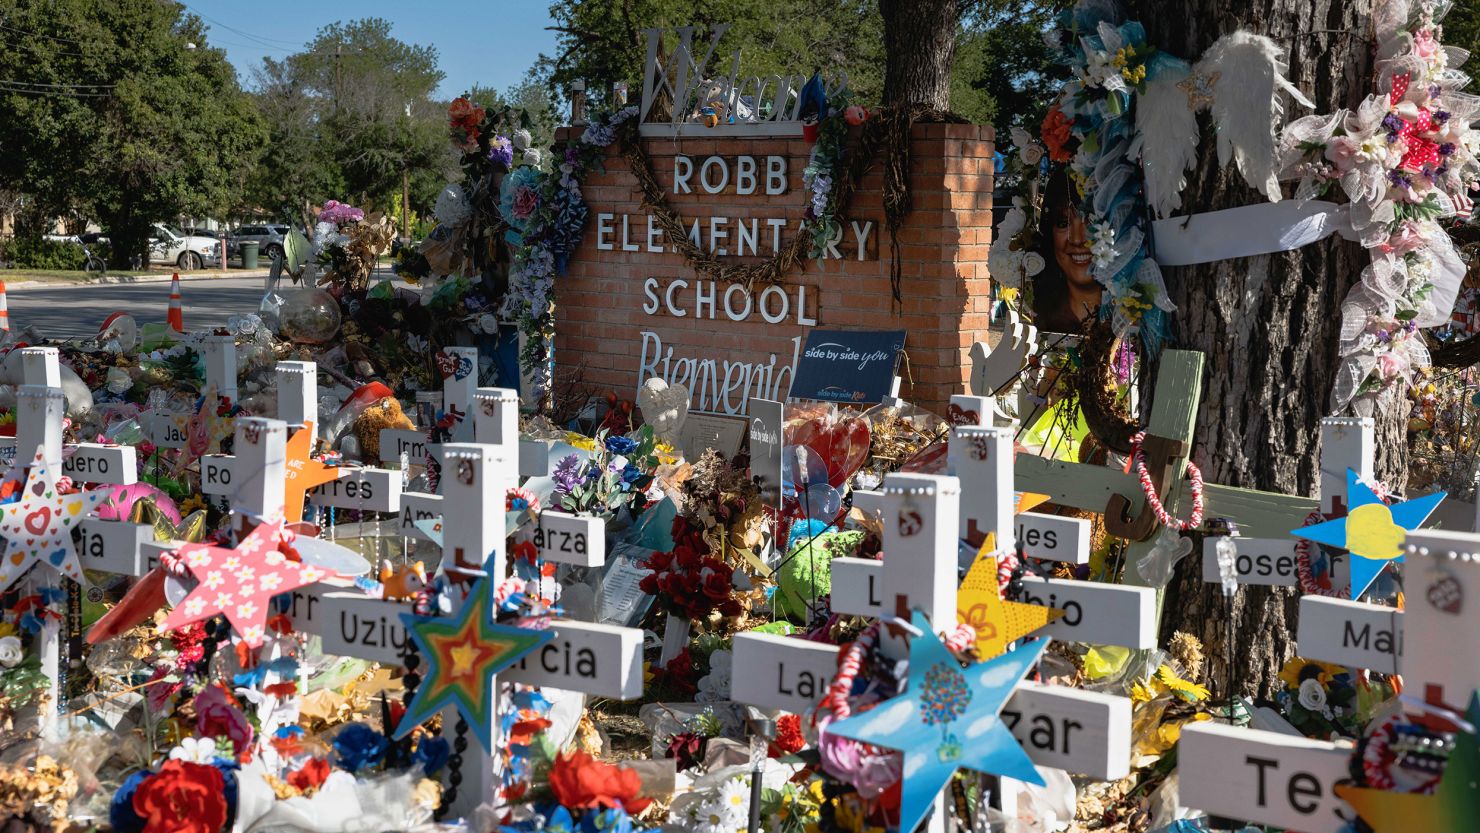 UVALDE, TX - JUNE 24: The memorial for the massacre at Robb Elementary School on June 24, 2022 in Uvalde, Texas. Nearly 300 Uvalde High School seniors received their diplomas one month to the day after nineteen children and two adults were killed at Robb Elementary School after a former student entered the school and barricaded himself in a classroom.  (Photo by Jordan Vonderhaar/Getty Images)